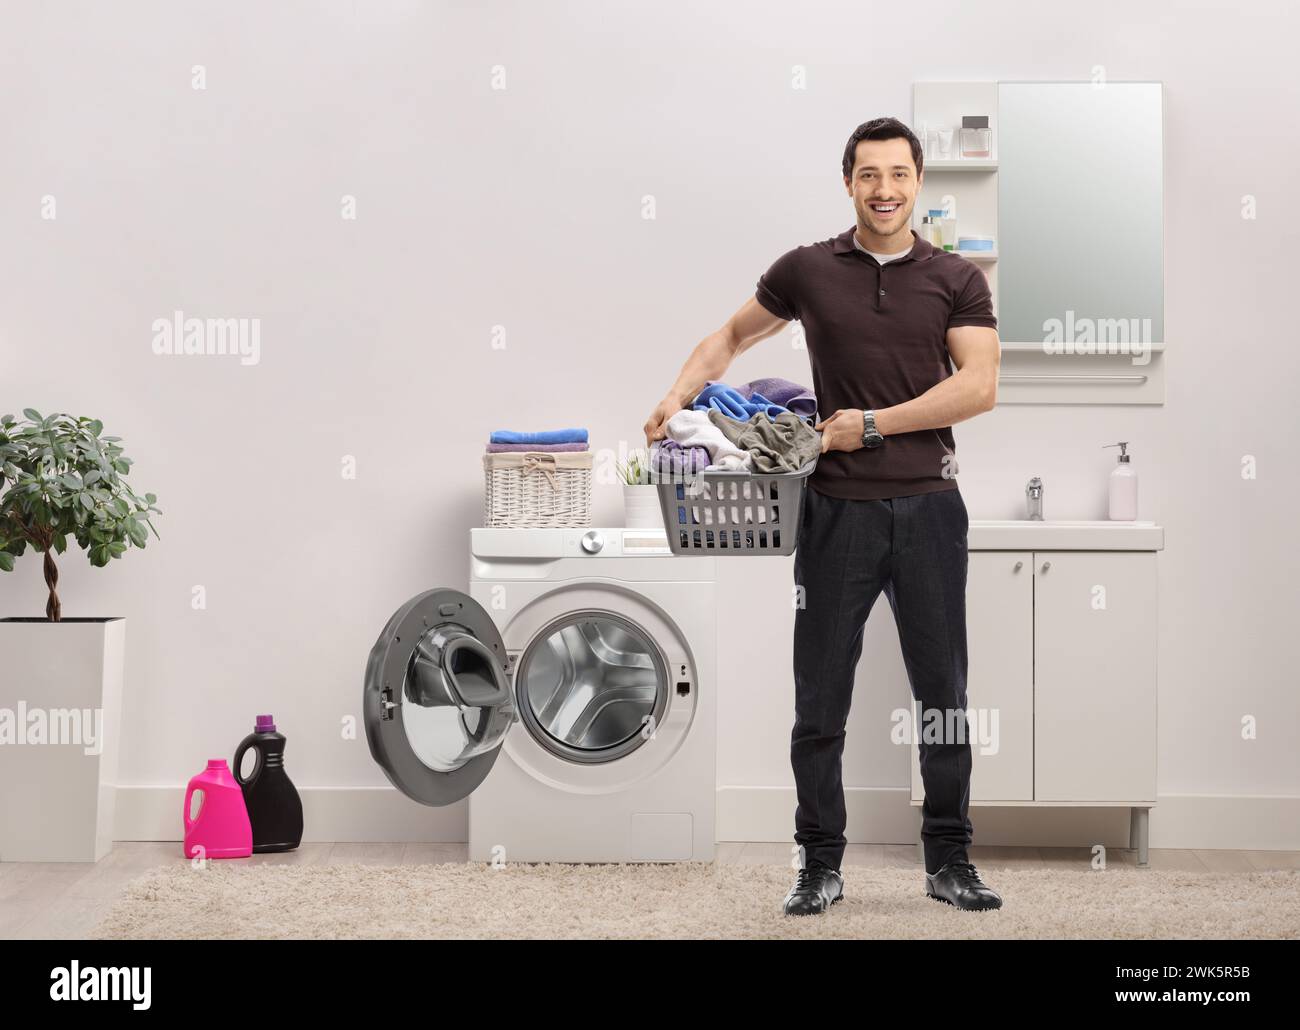 Young man with a laundry basket full of clothes standing in a bathroom next to a washing machine Stock Photo